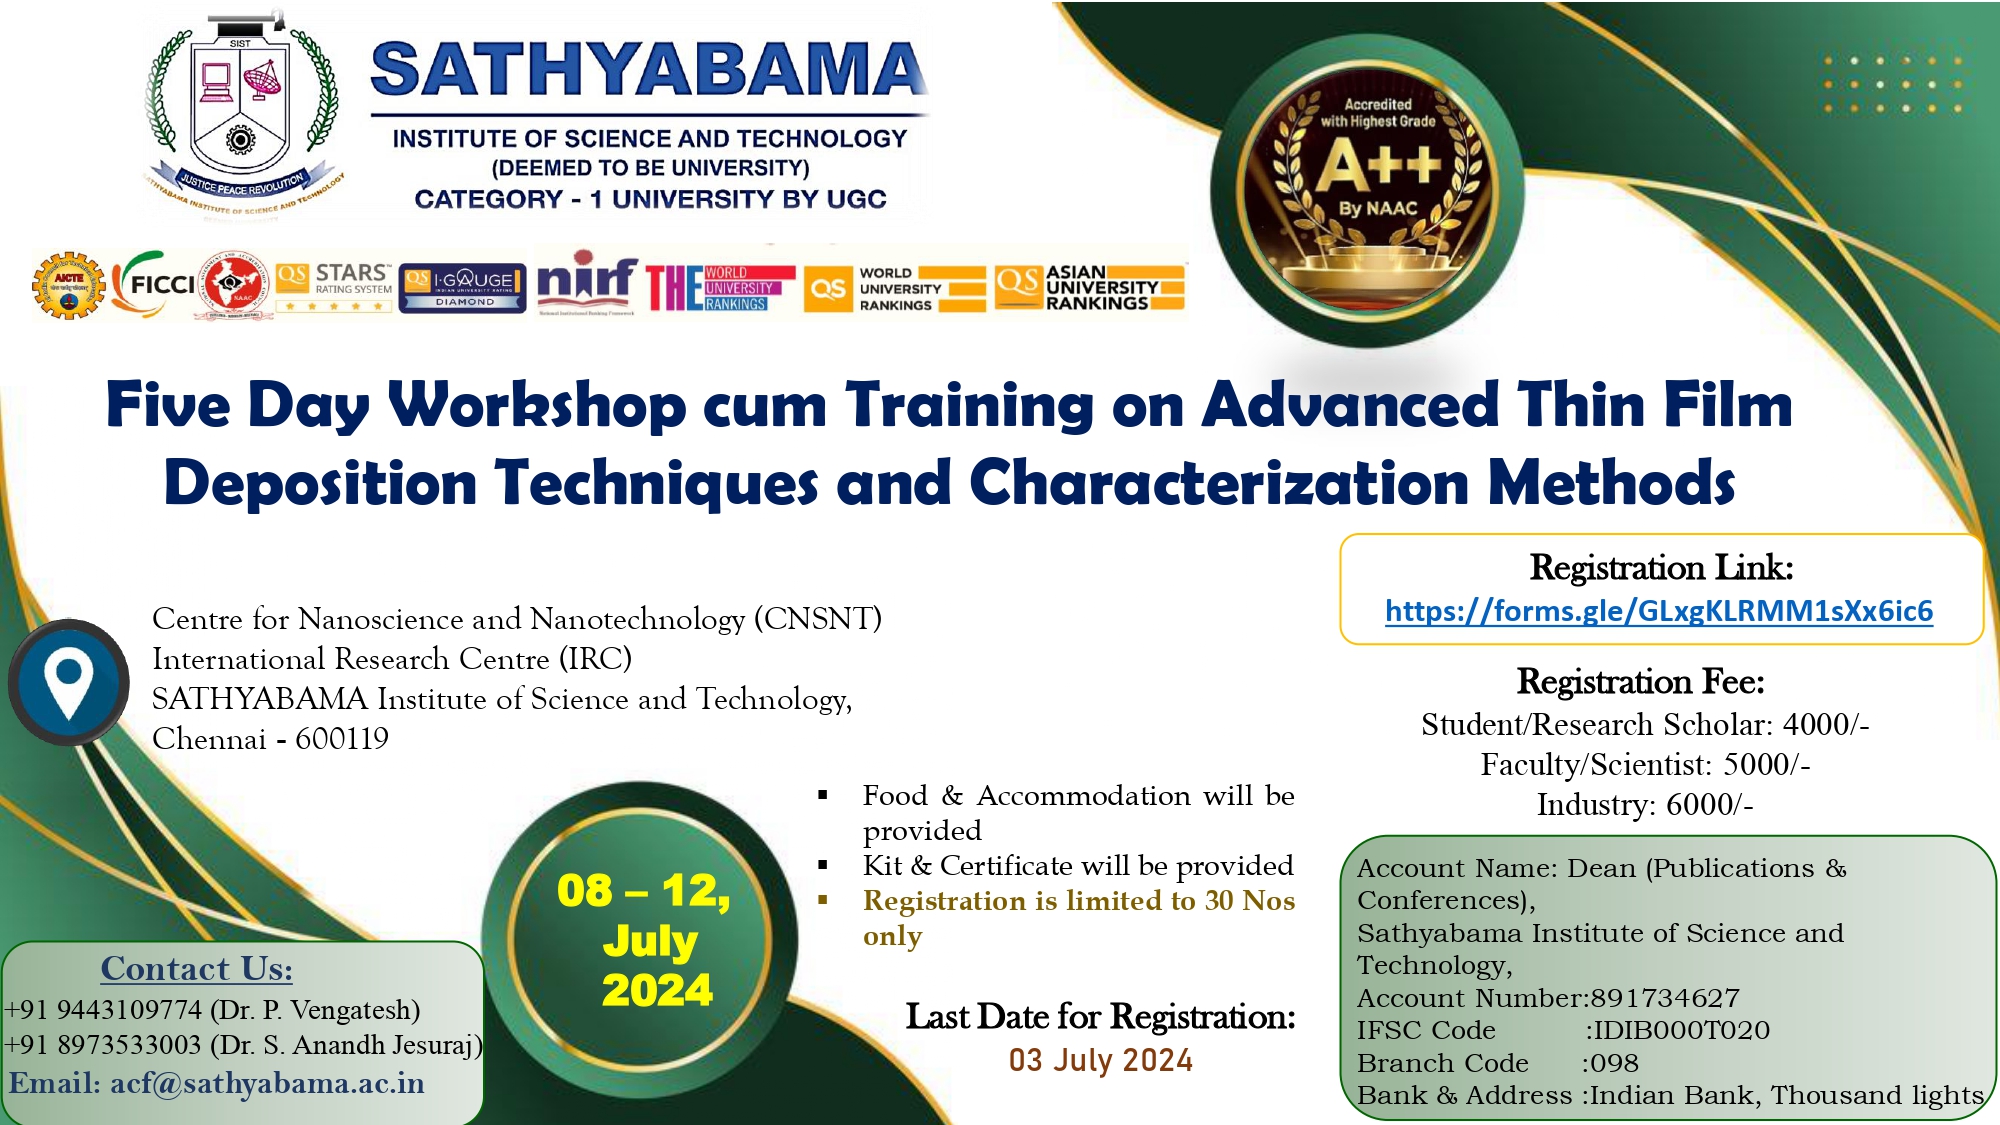 Five Day Workshop cum Training on Advanced Thin Film Deposition Techniques and Characterization